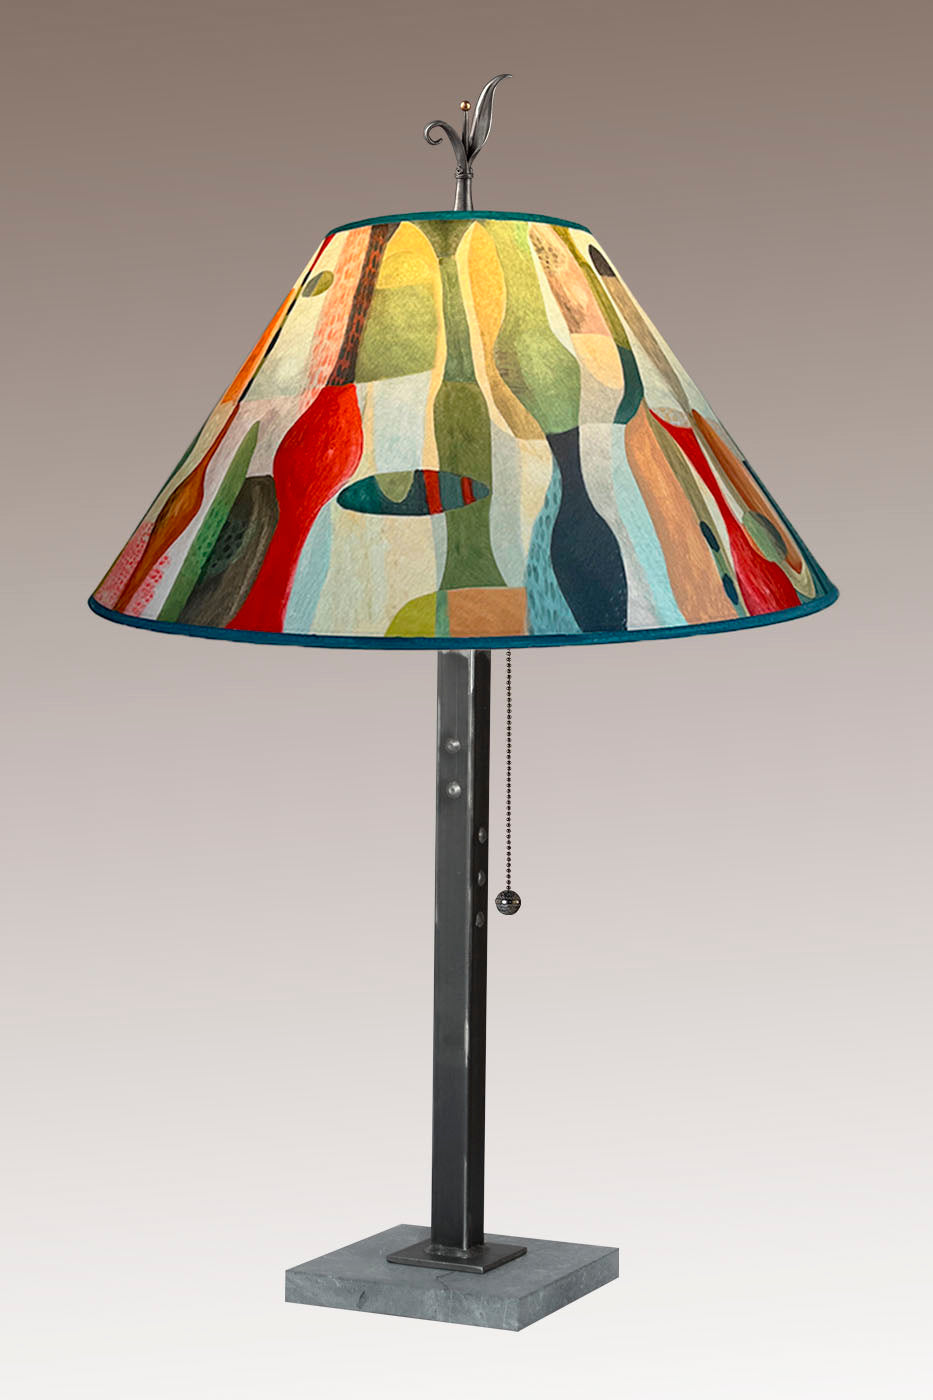 Janna Ugone & Co Table Lamp Steel Table Lamp with Large Conical Shade in Riviera in Poppy